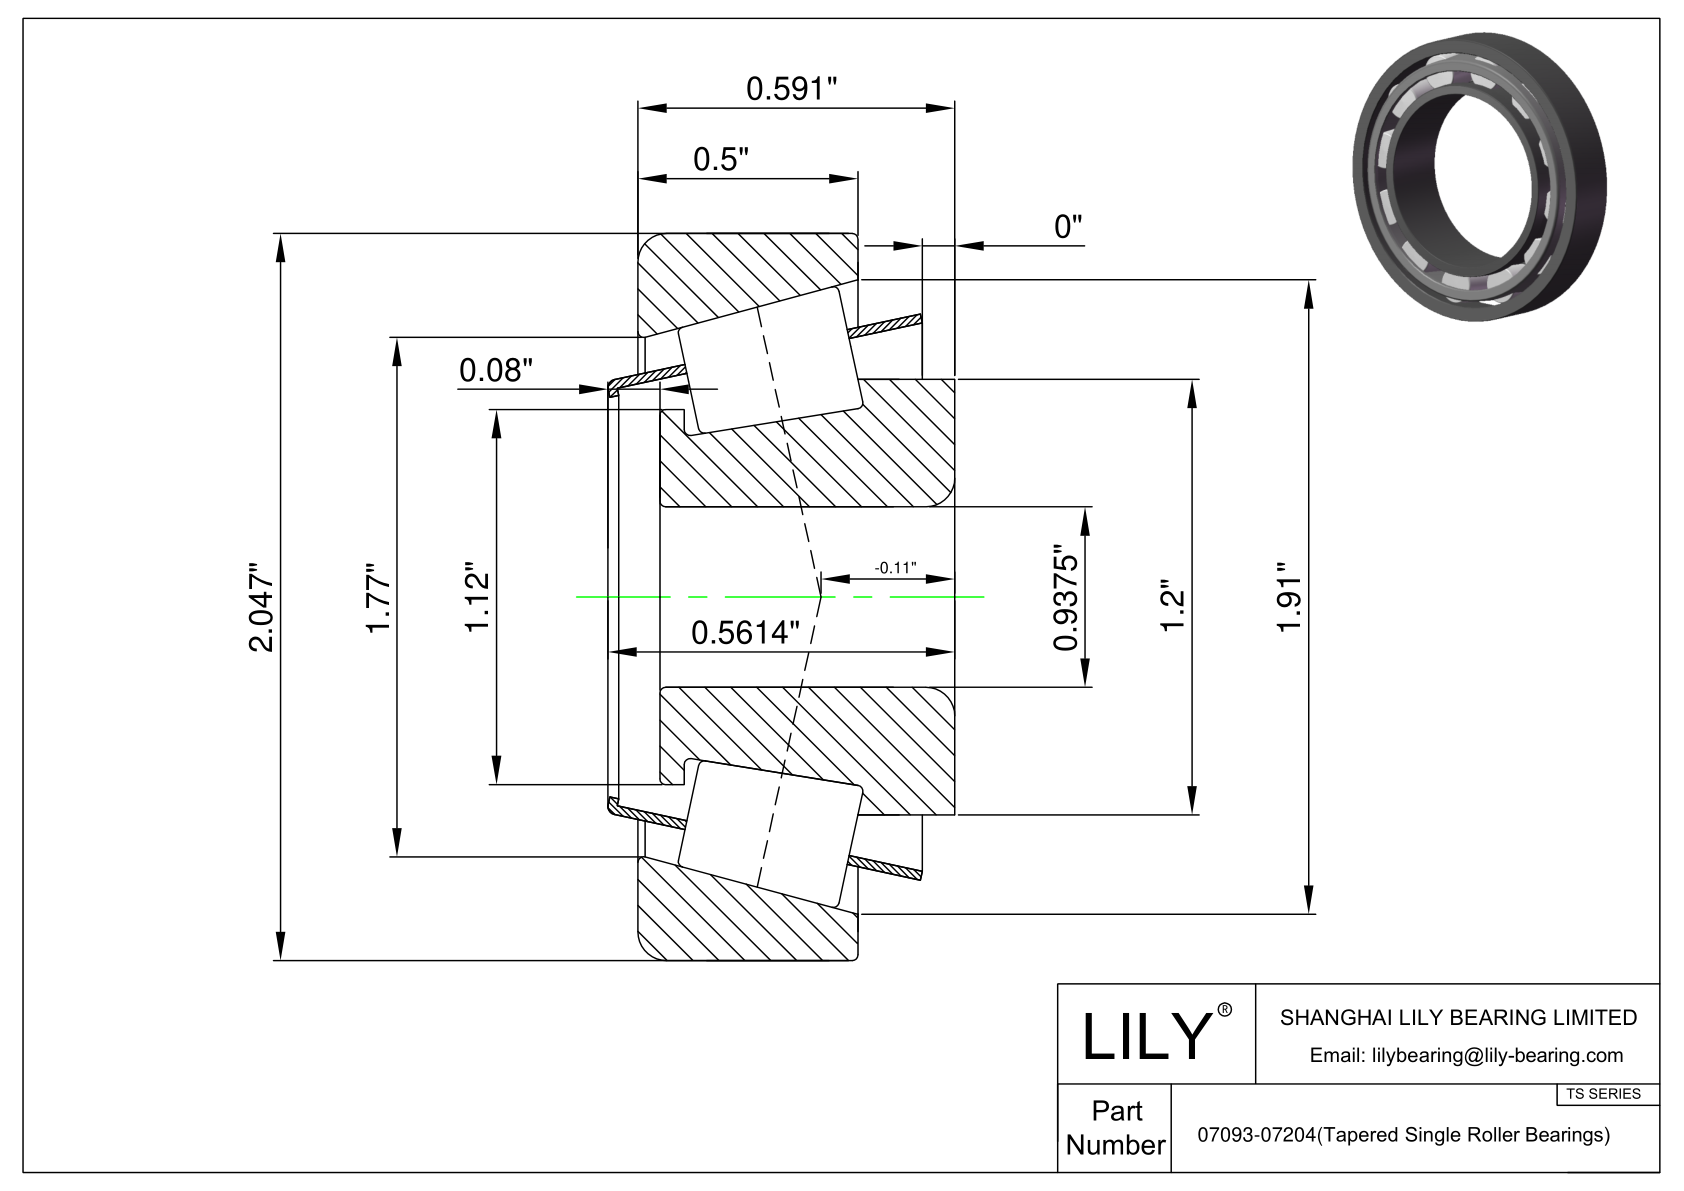 07093-07204 TS (Tapered Single Roller Bearings) (Imperial) cad drawing